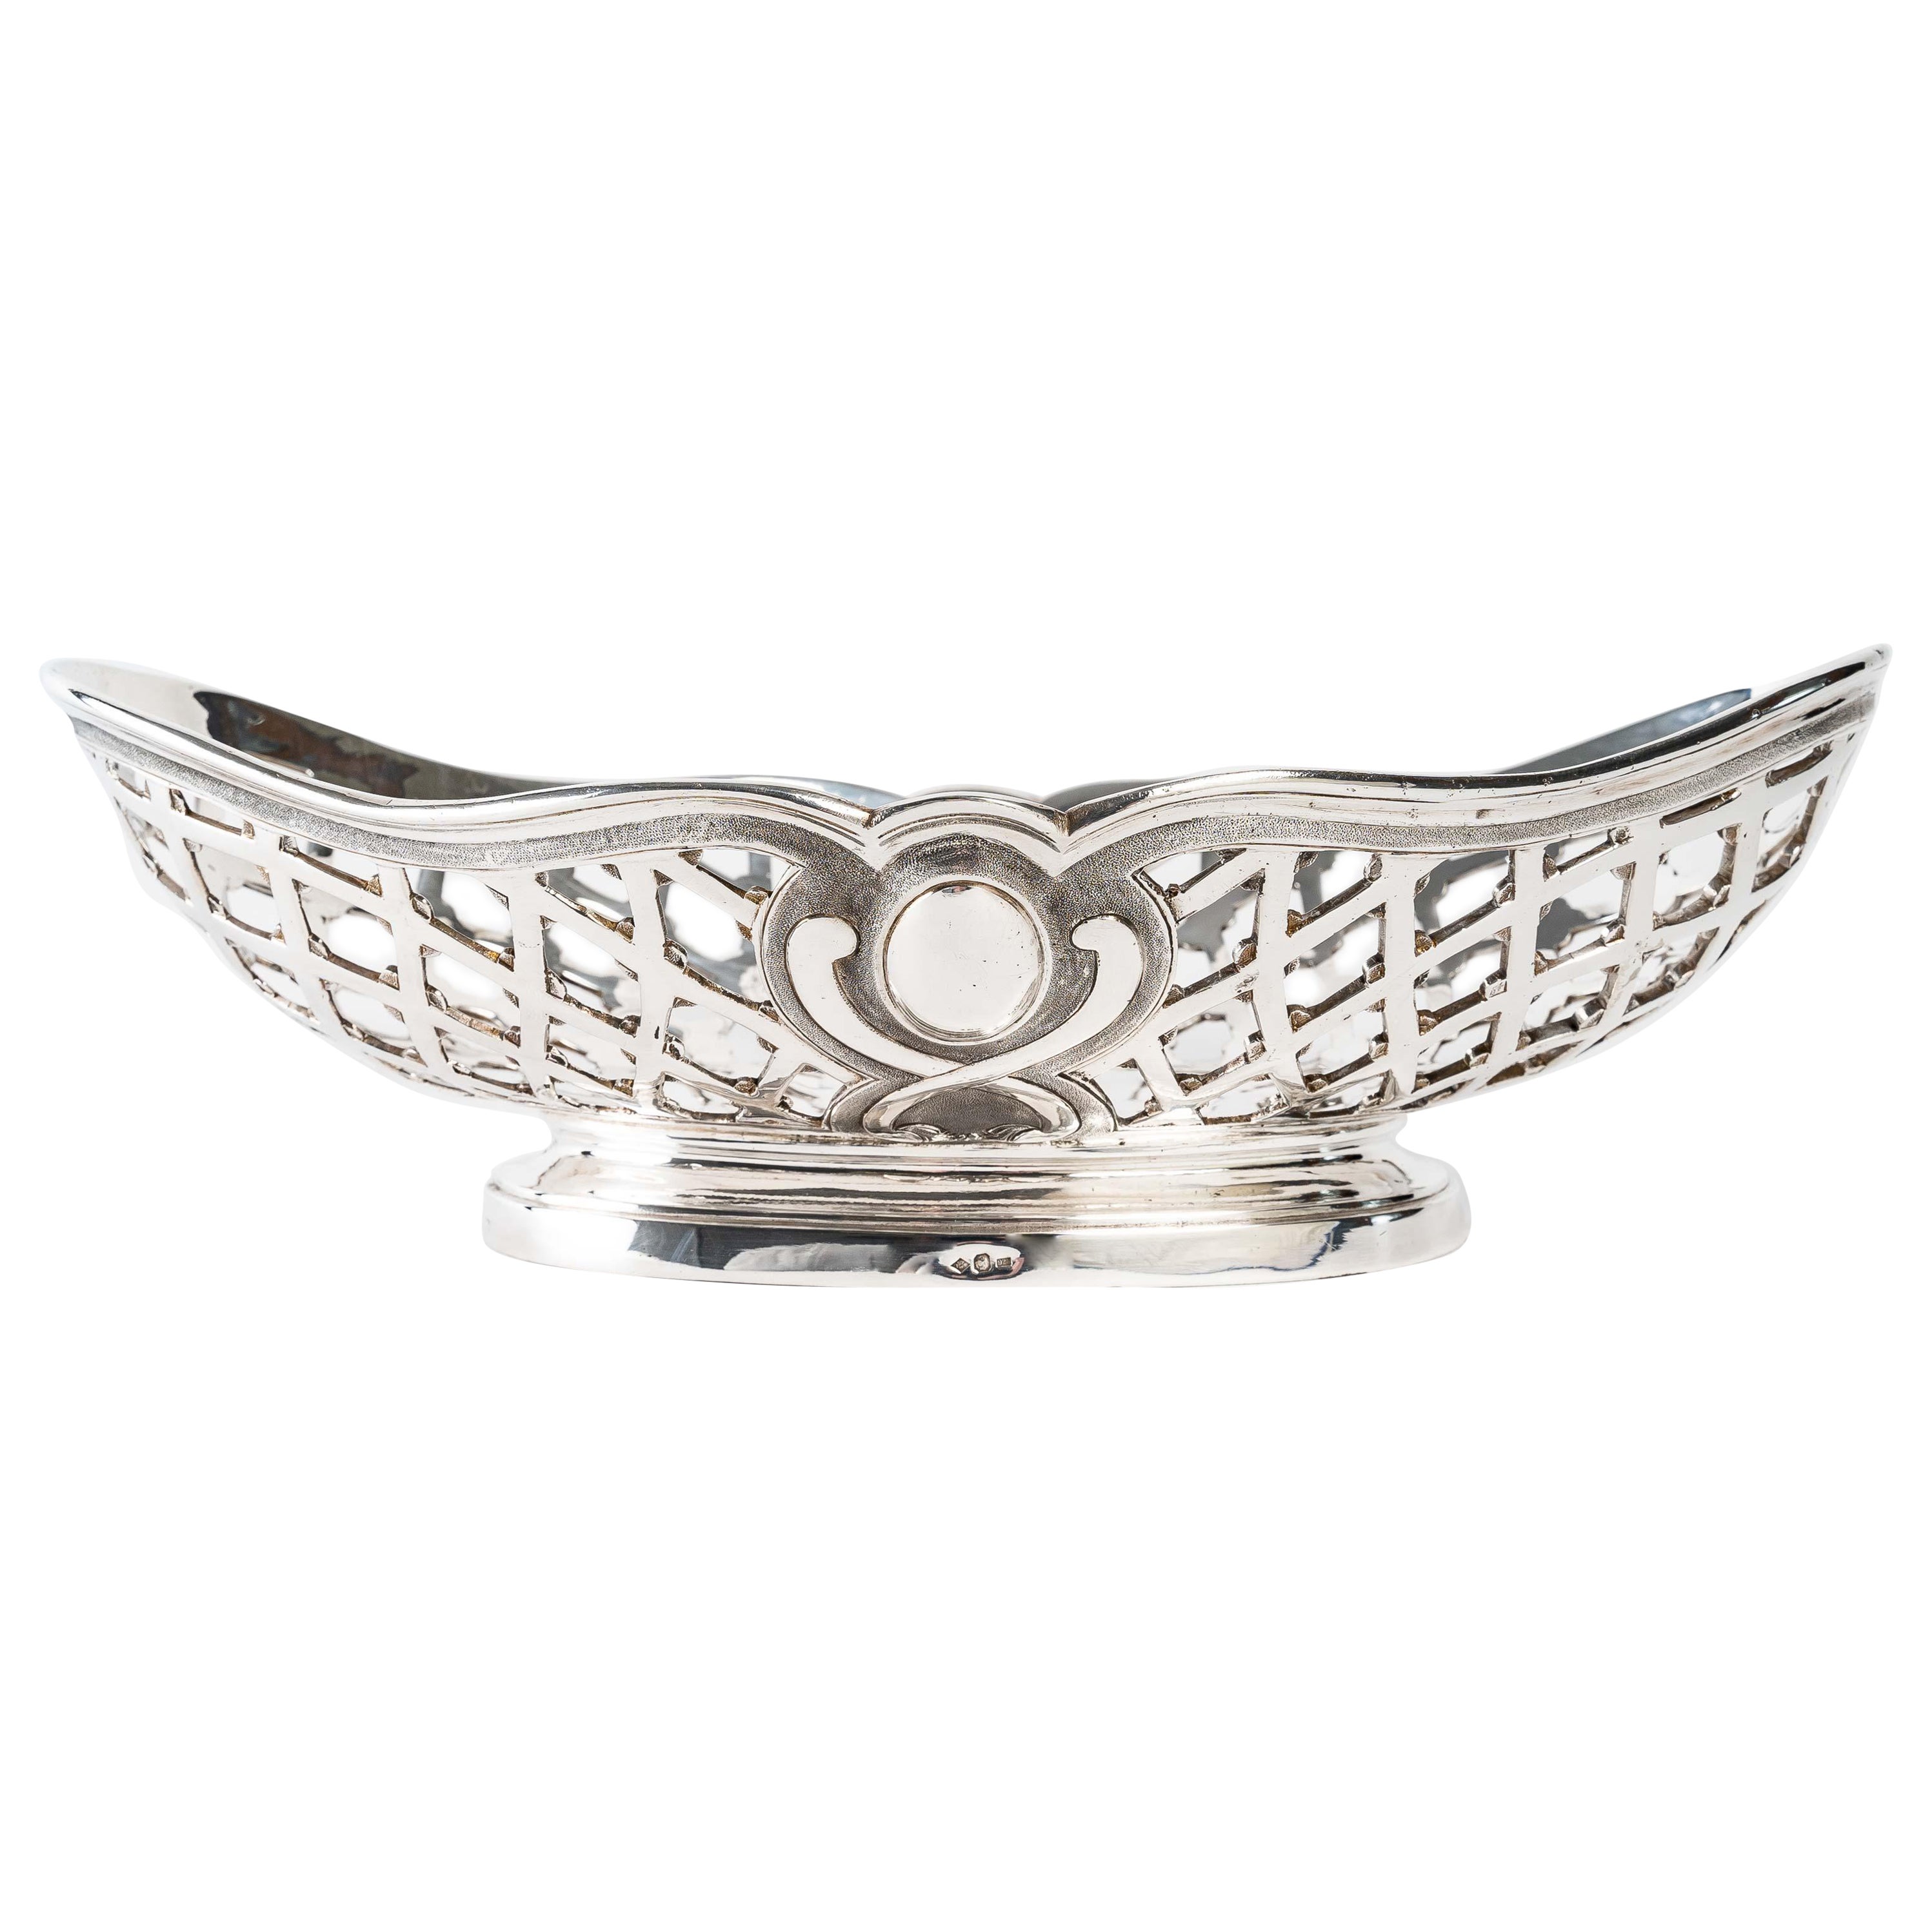 Silversmith Souche Lapparra - Solid Silver Basket Circa 20th Century For Sale